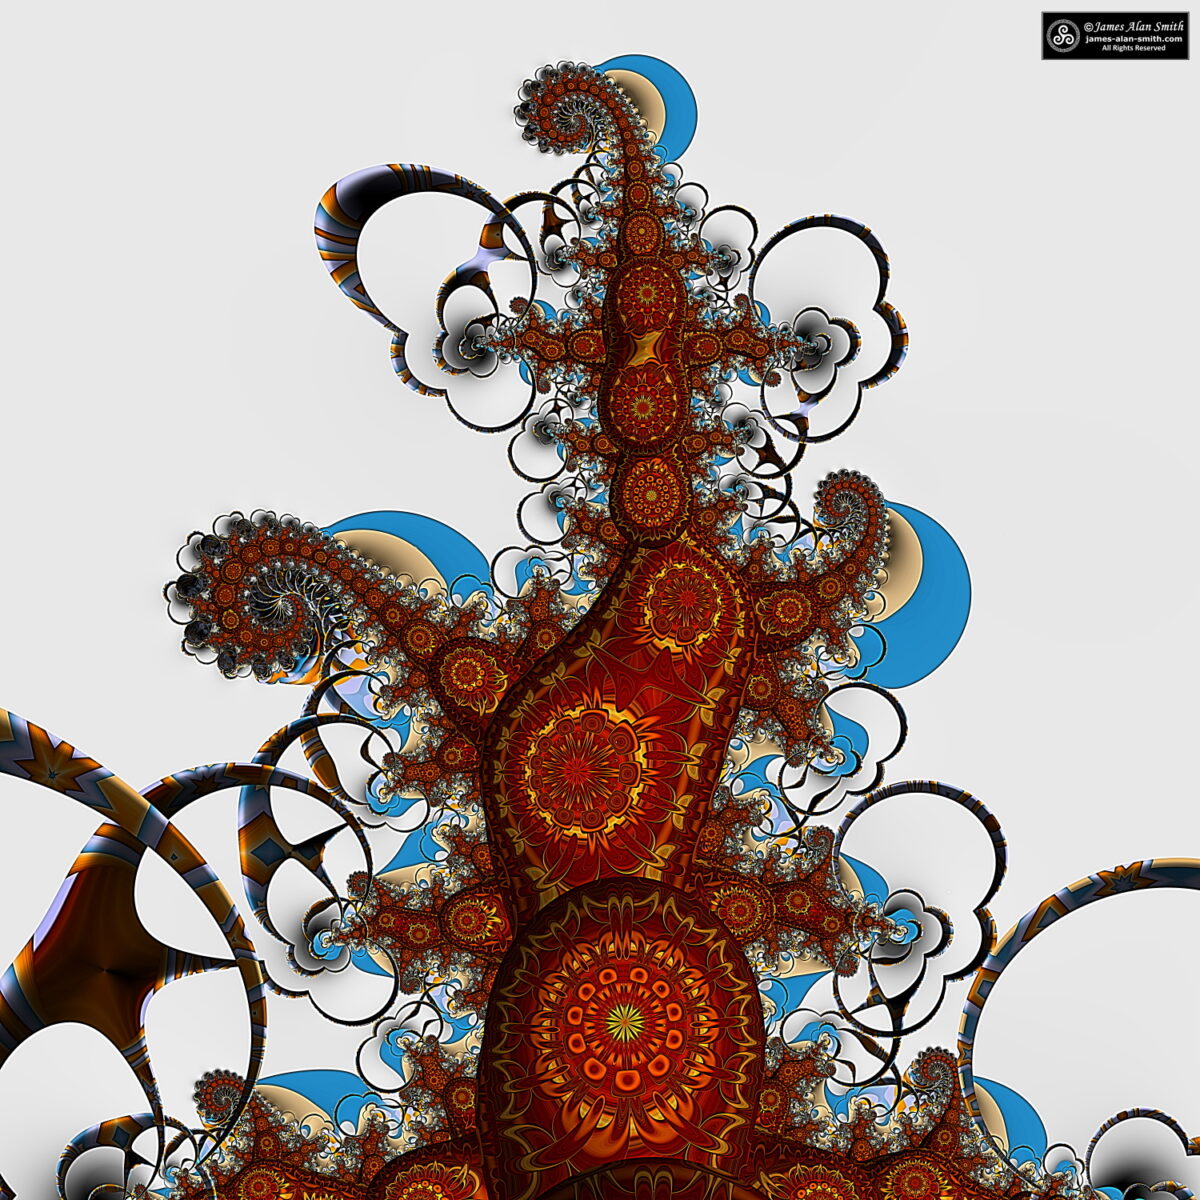 Dreams of Fractals Dreaming of Fractals: Artwork by James Alan Smith